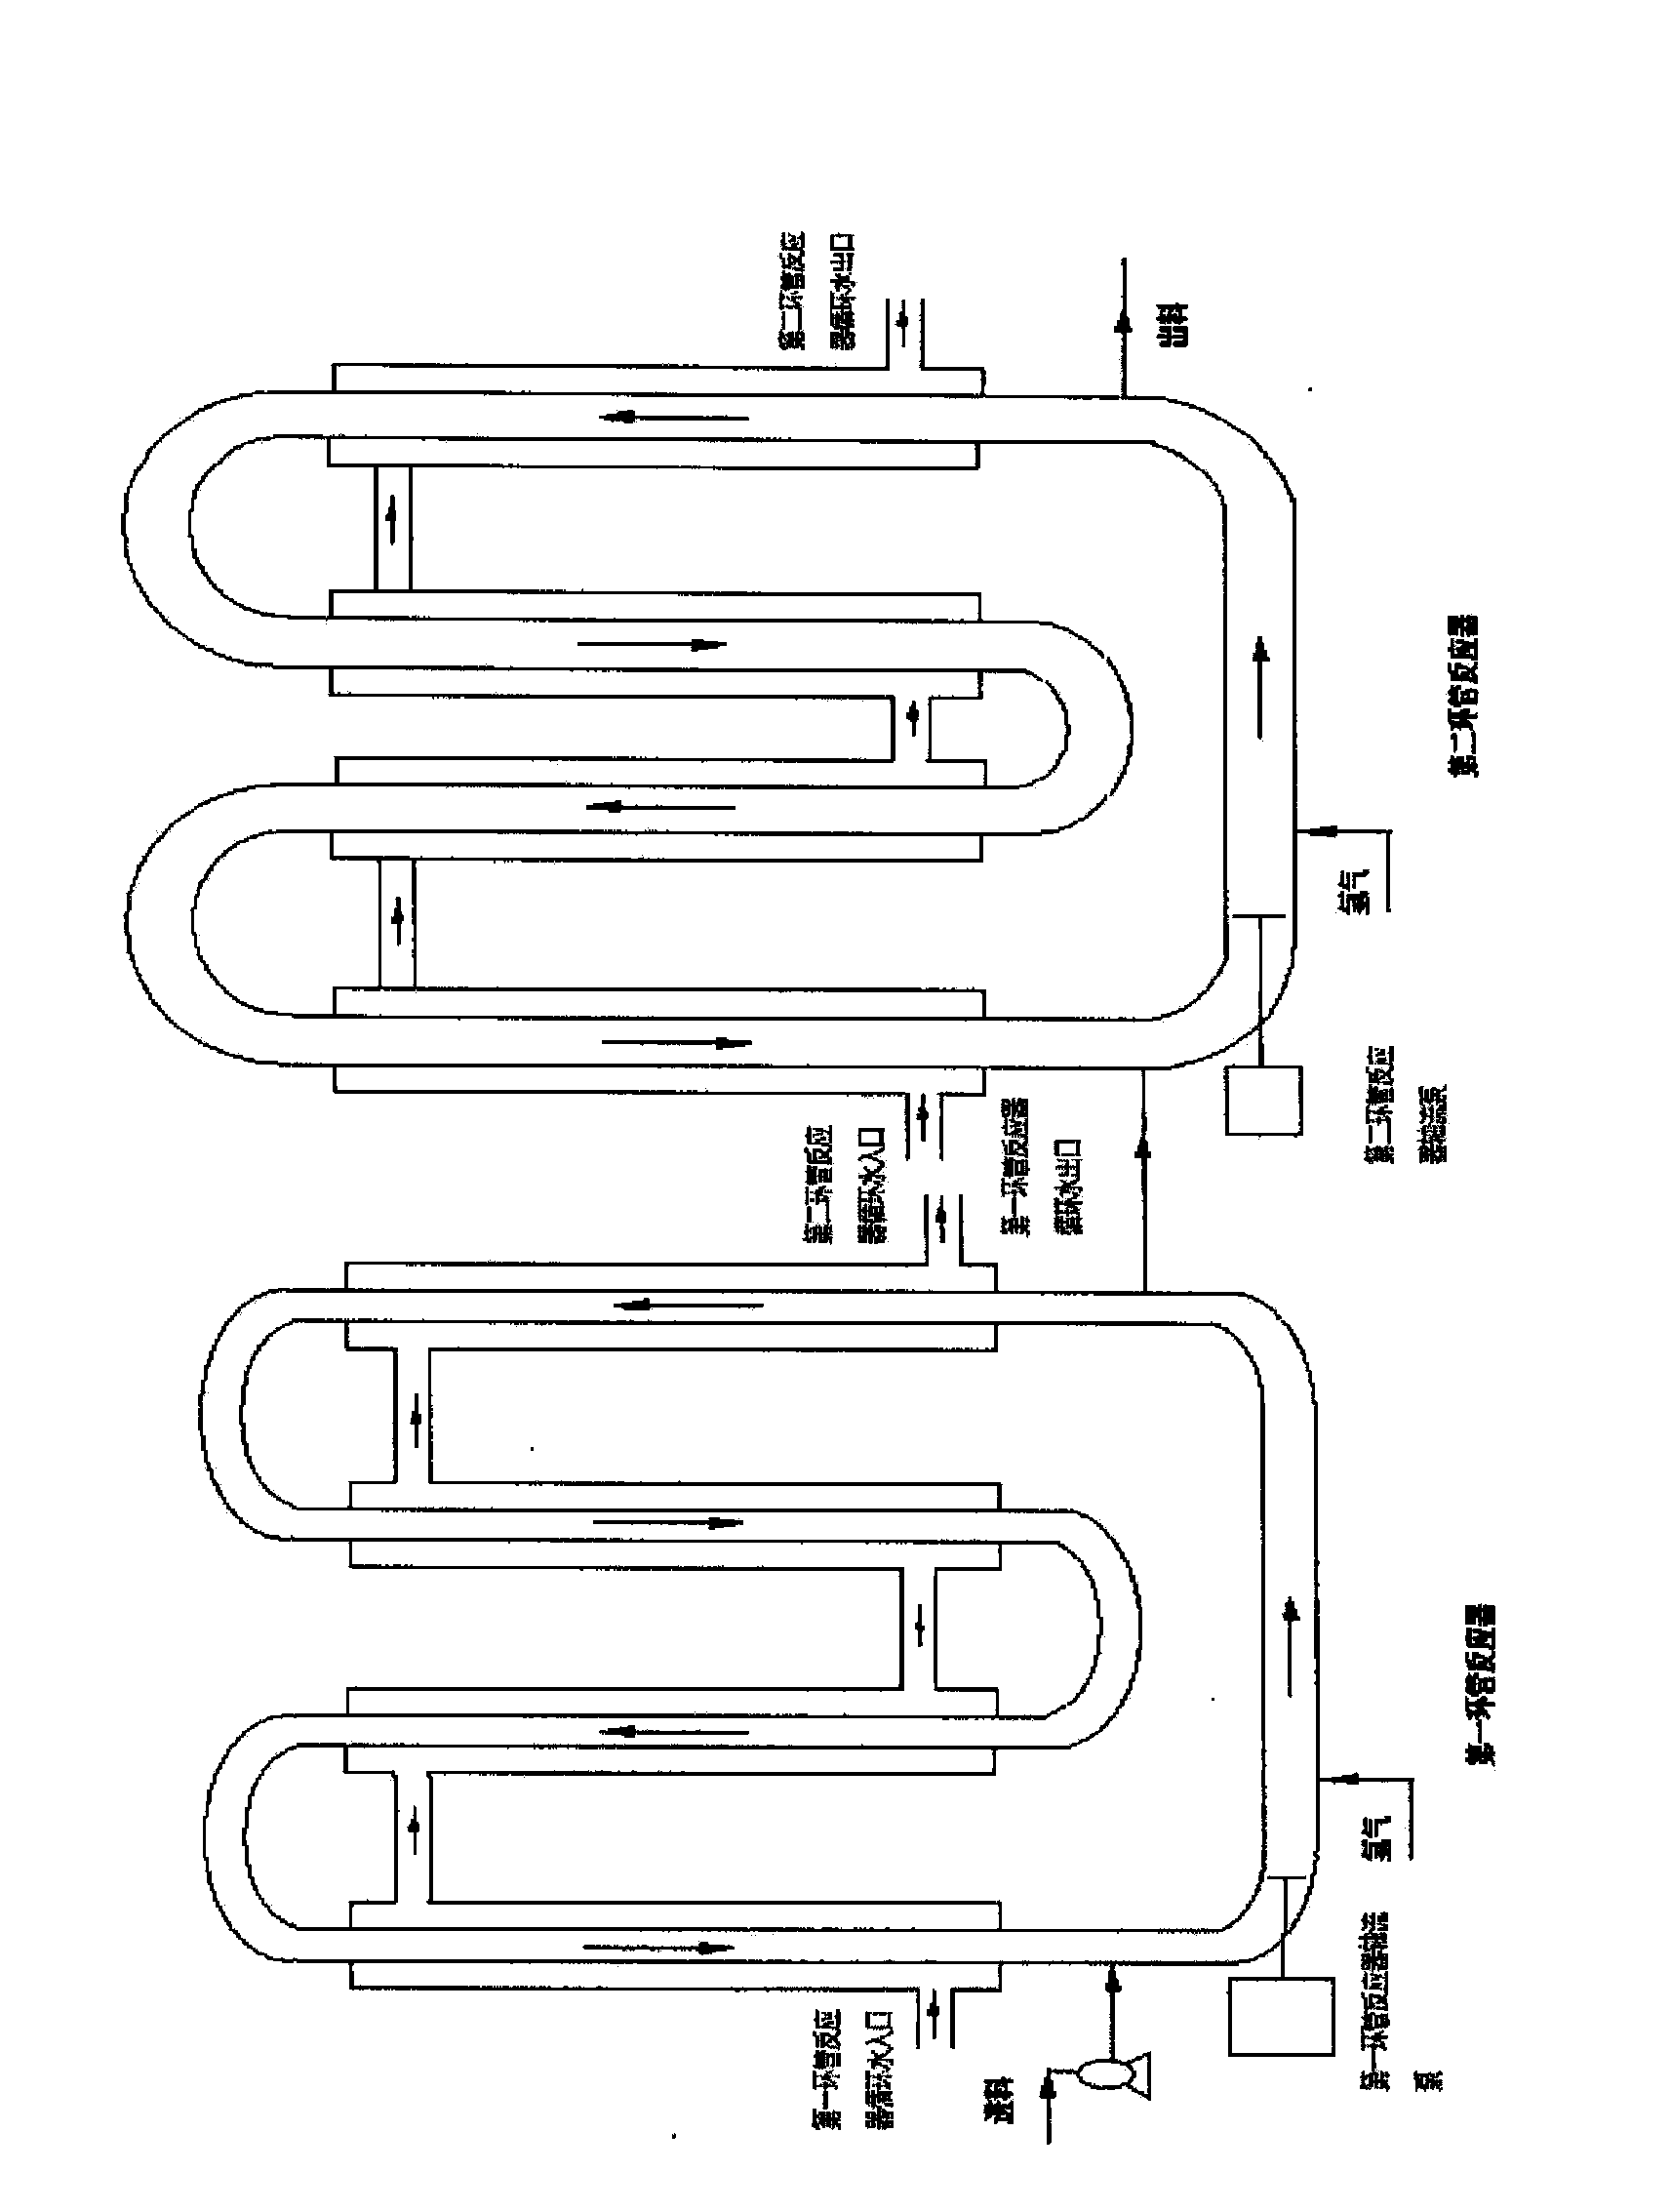 Olefines unsaturated bond-containing polymer hydrogenation reaction method